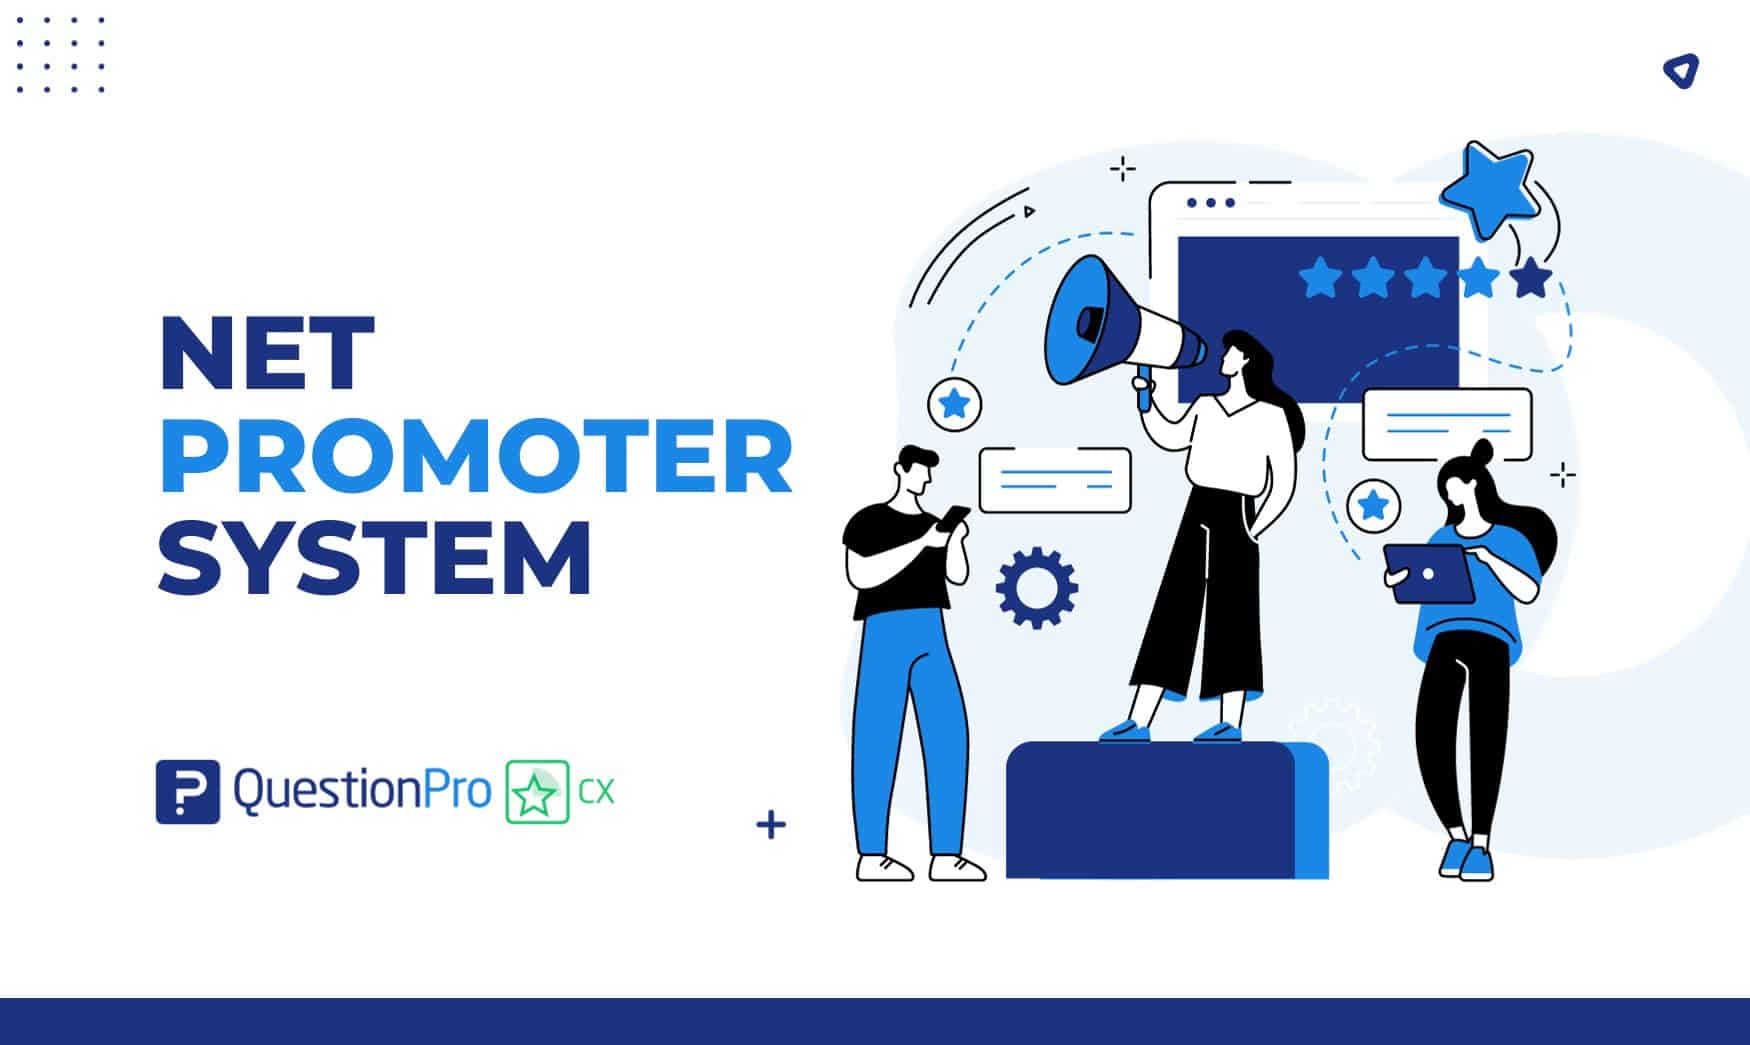 Unlock the secrets of success with the Net Promoter System. Explore its components and effective strategies for building it.